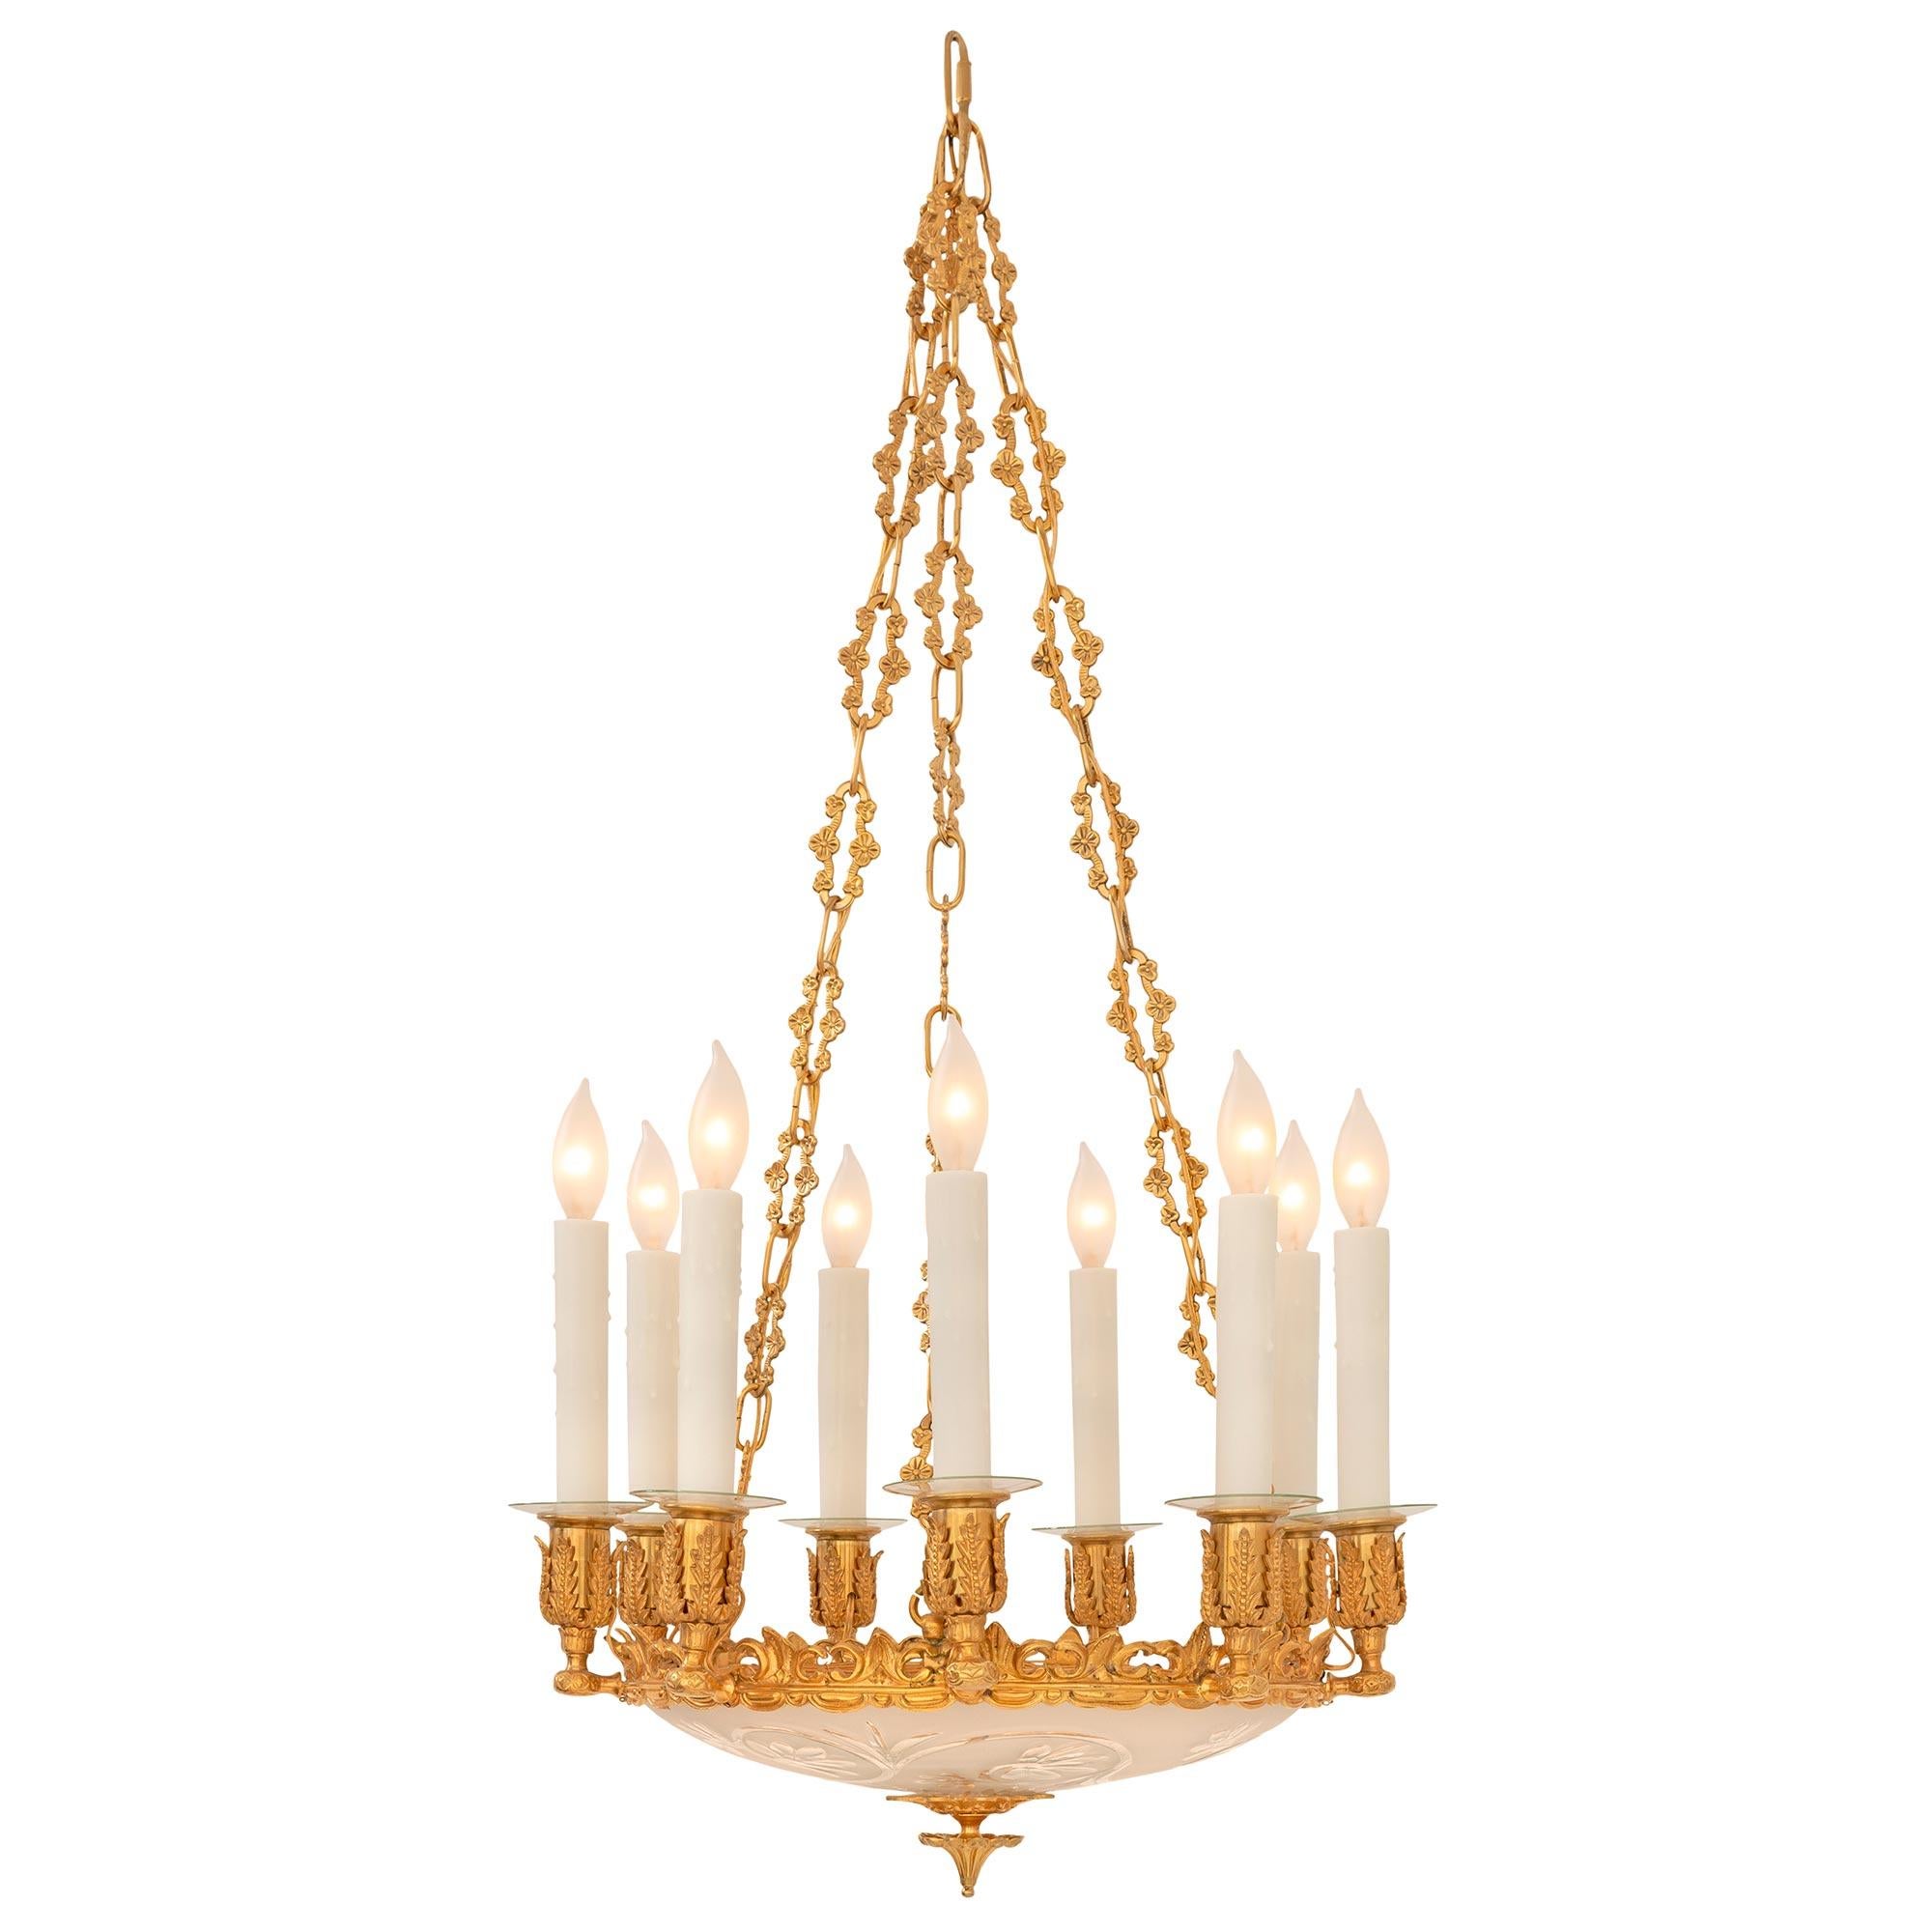 A striking and most decorative complete set of three French 19th century ormolu and etched frosted glass chandeliers. Each nine arm chandelier is centered by a lovely reeded and foliate bottom ormolu finial below the beautiful frosted glass bowl